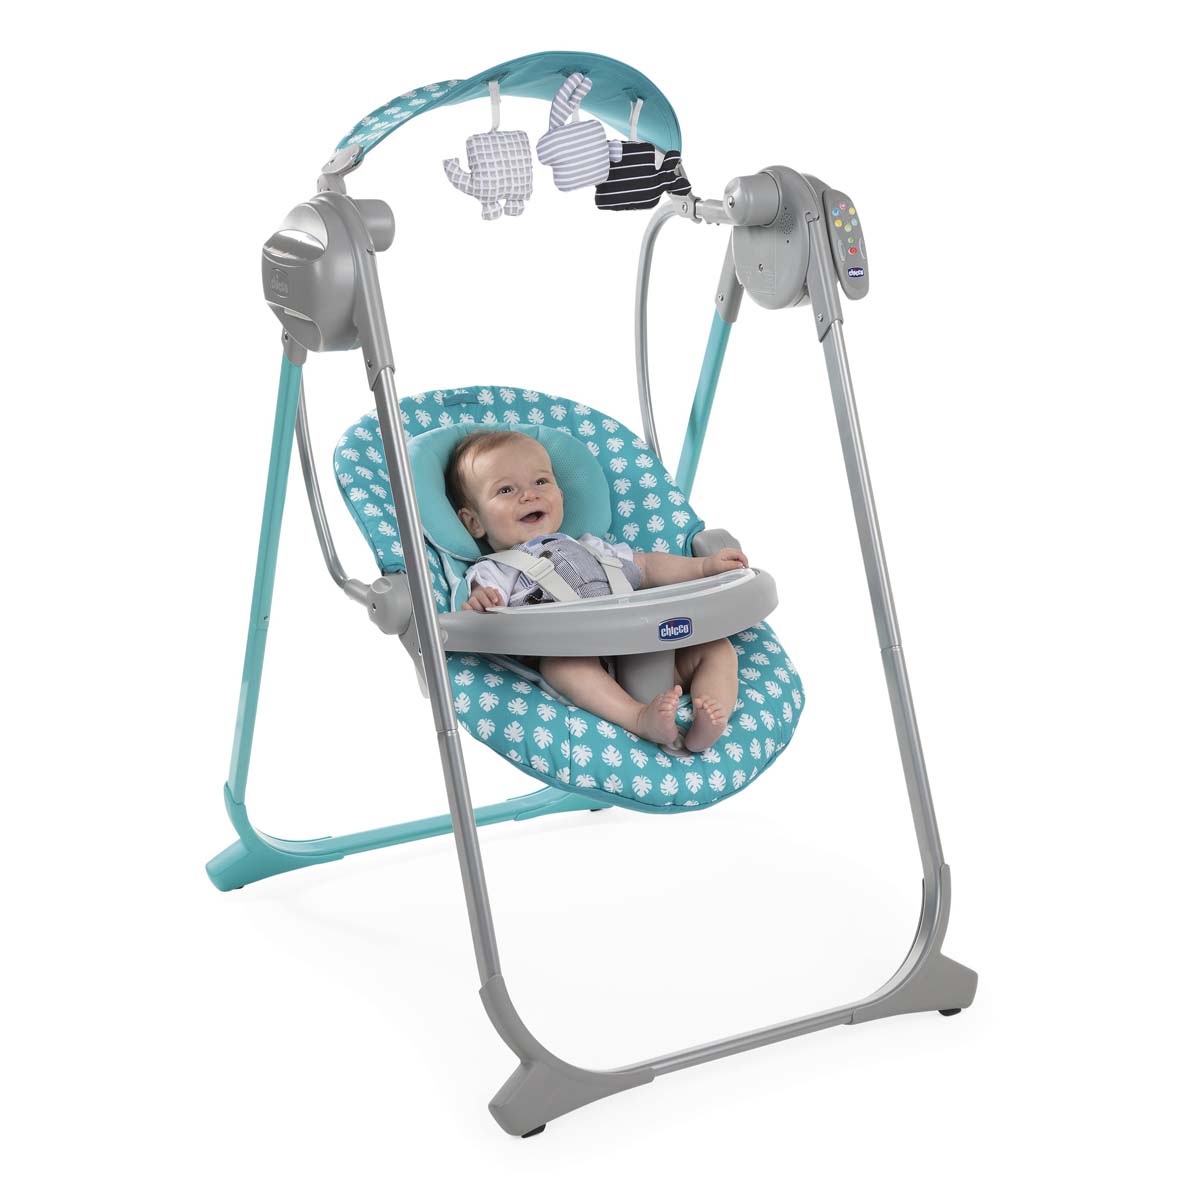 Altalena polly swing up turquoise - CHICCO